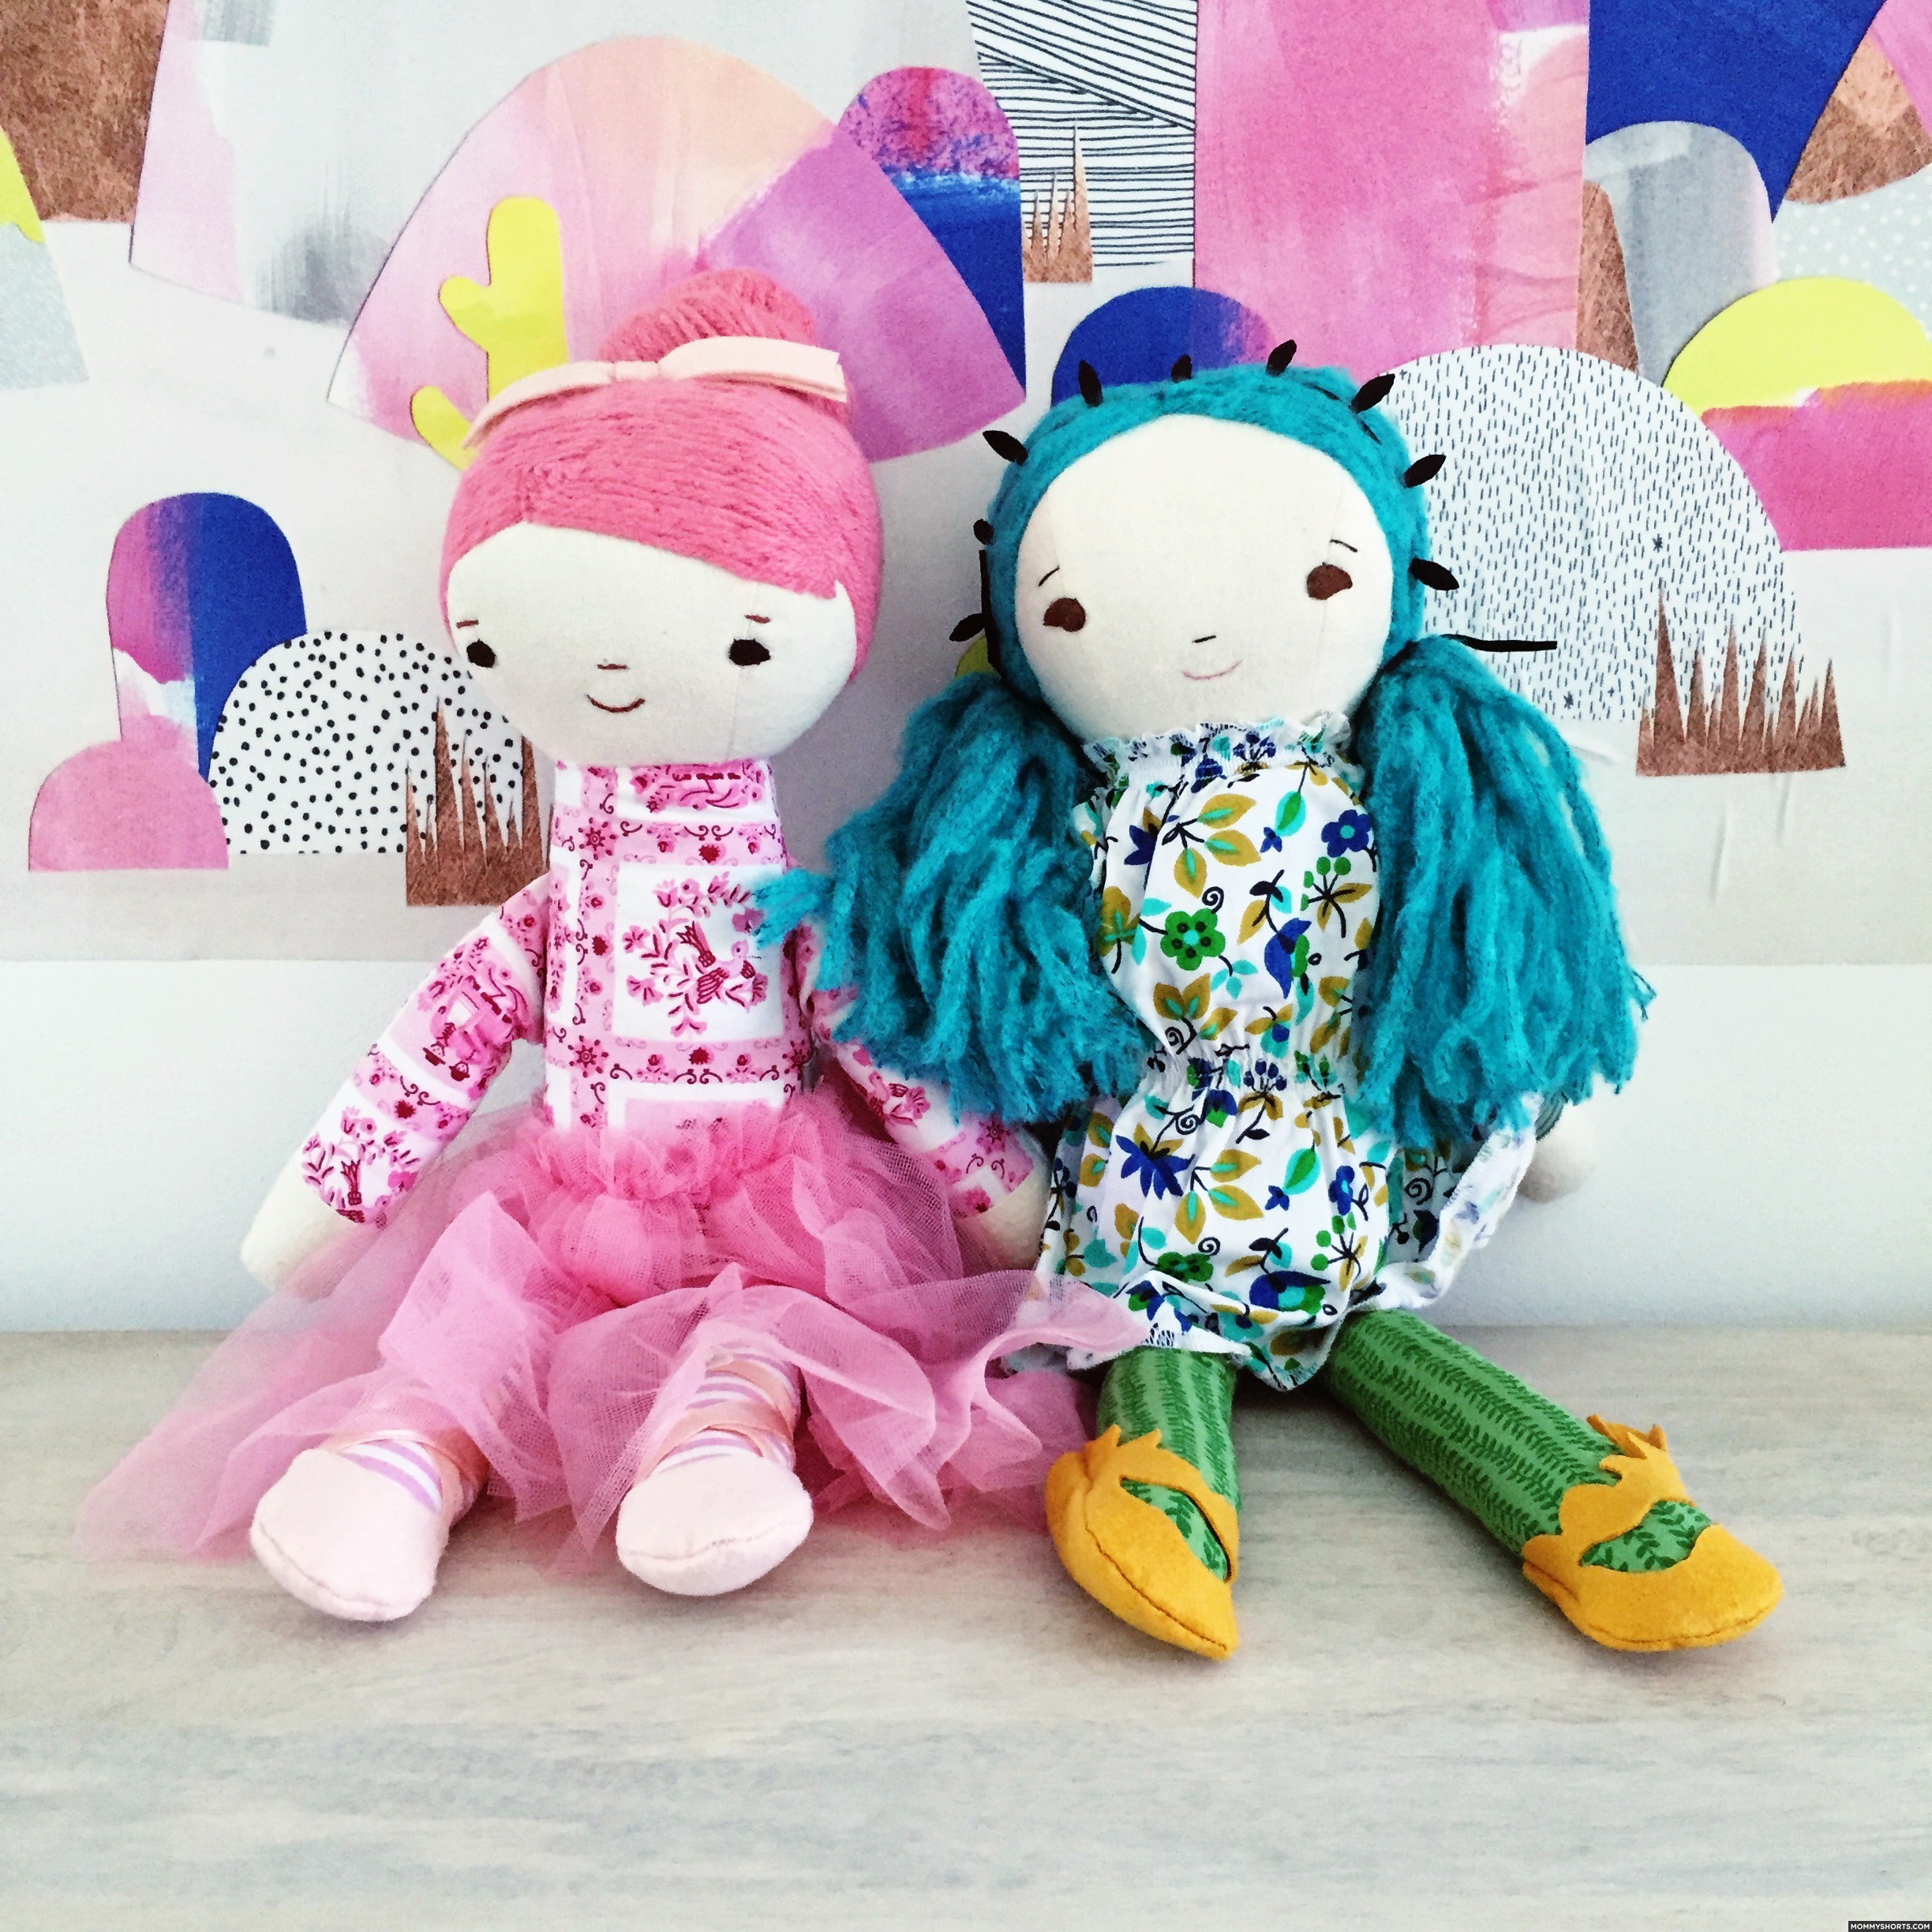 Love these dolls from Land of Nod